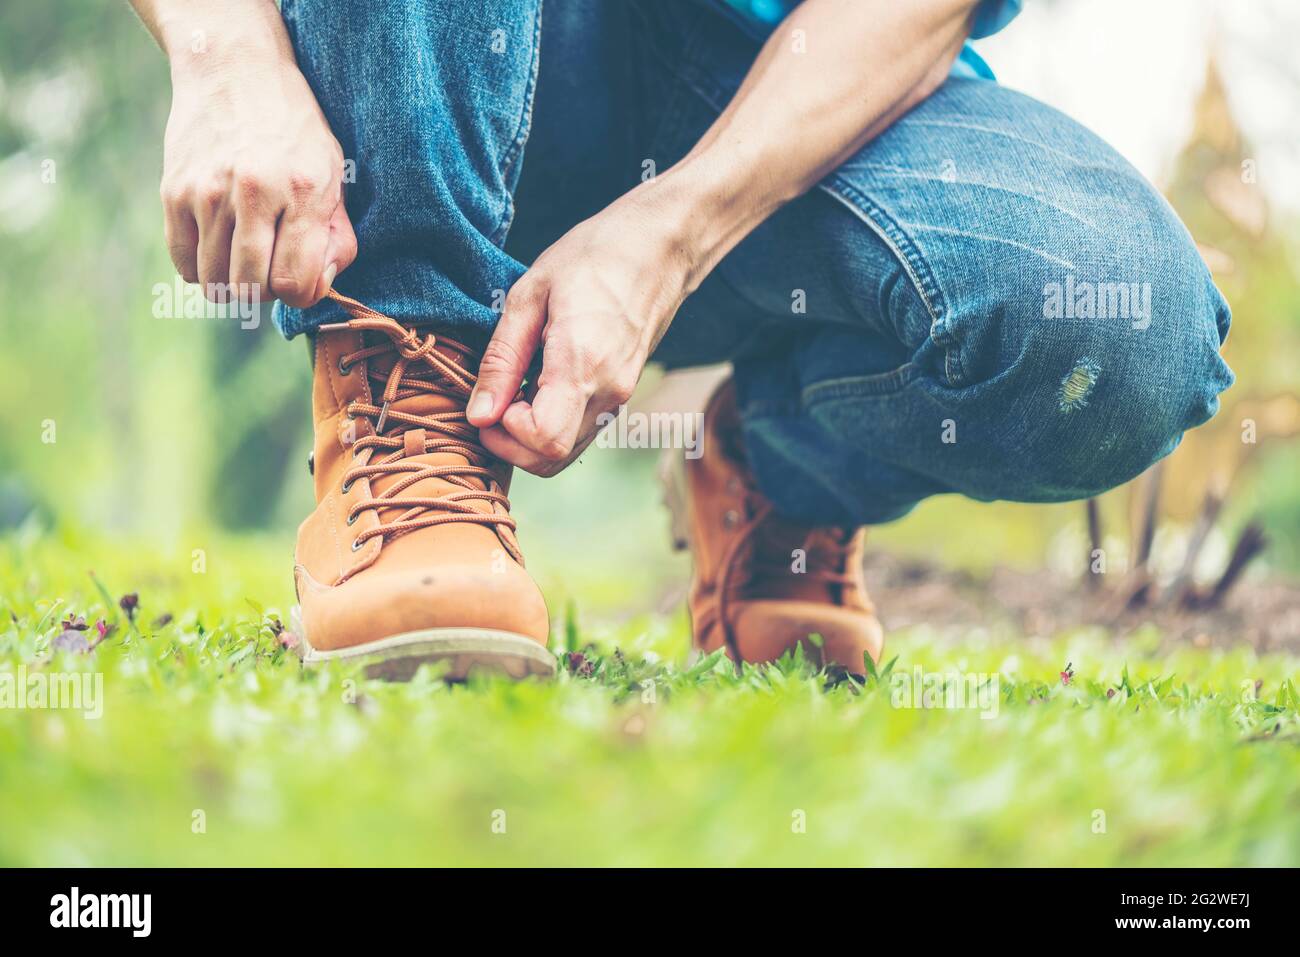 Footwear concept.Handsome man wear jeans knelt down to do up his shoelaces. Preparing before go to party. Brown boots on green grass. close up man han Stock Photo